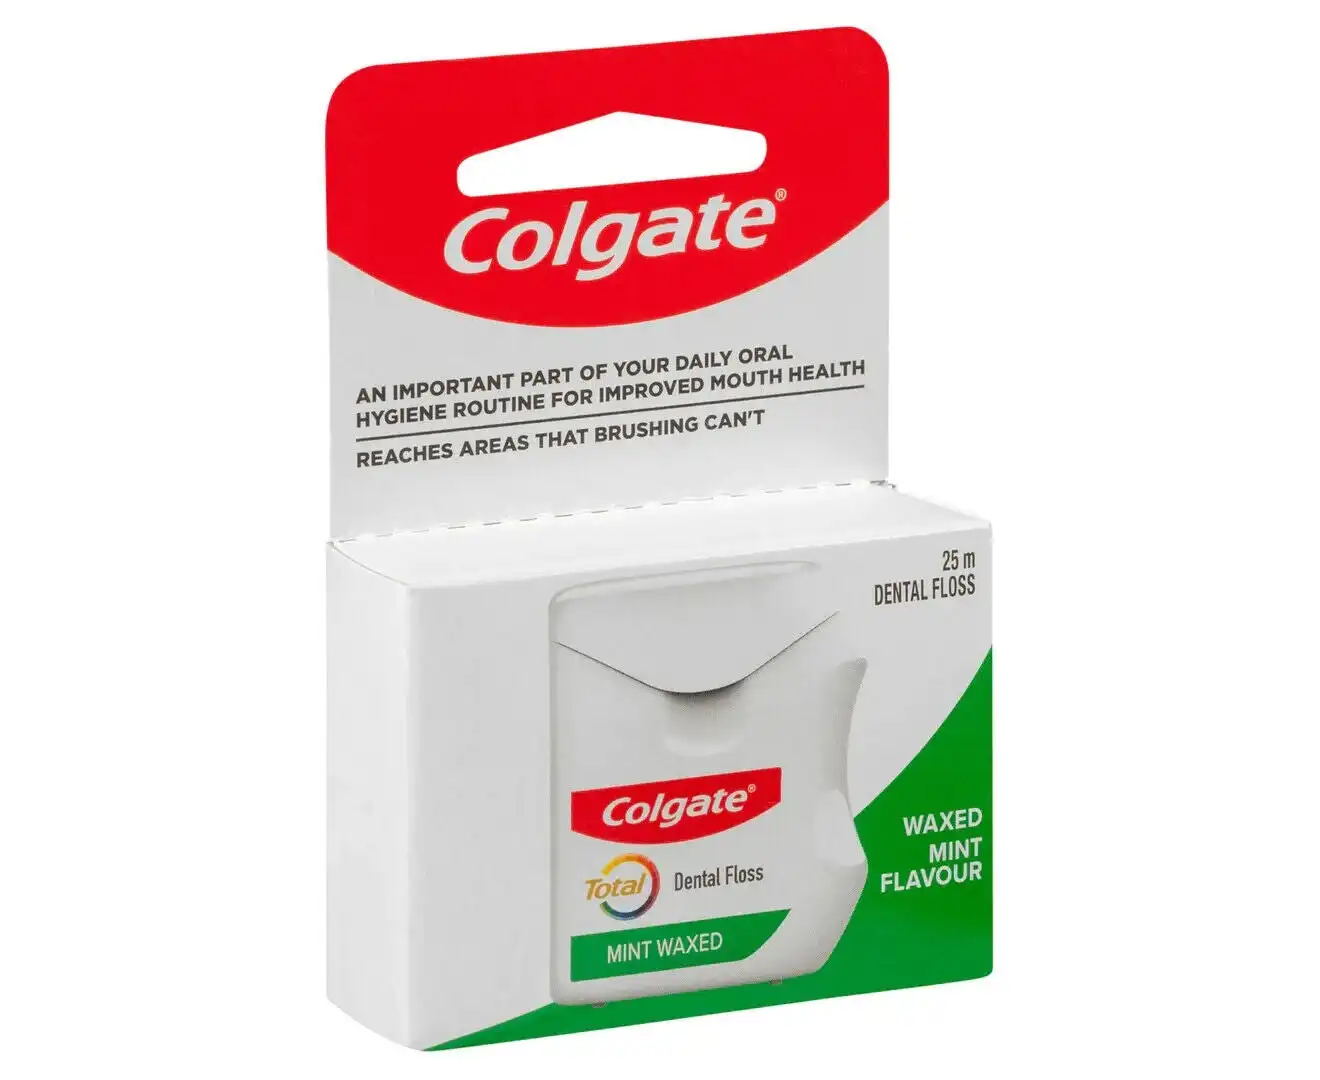 Colgate Total Mint Waxed Dental Floss 25m Protect Gums Reduce Tooth Decay